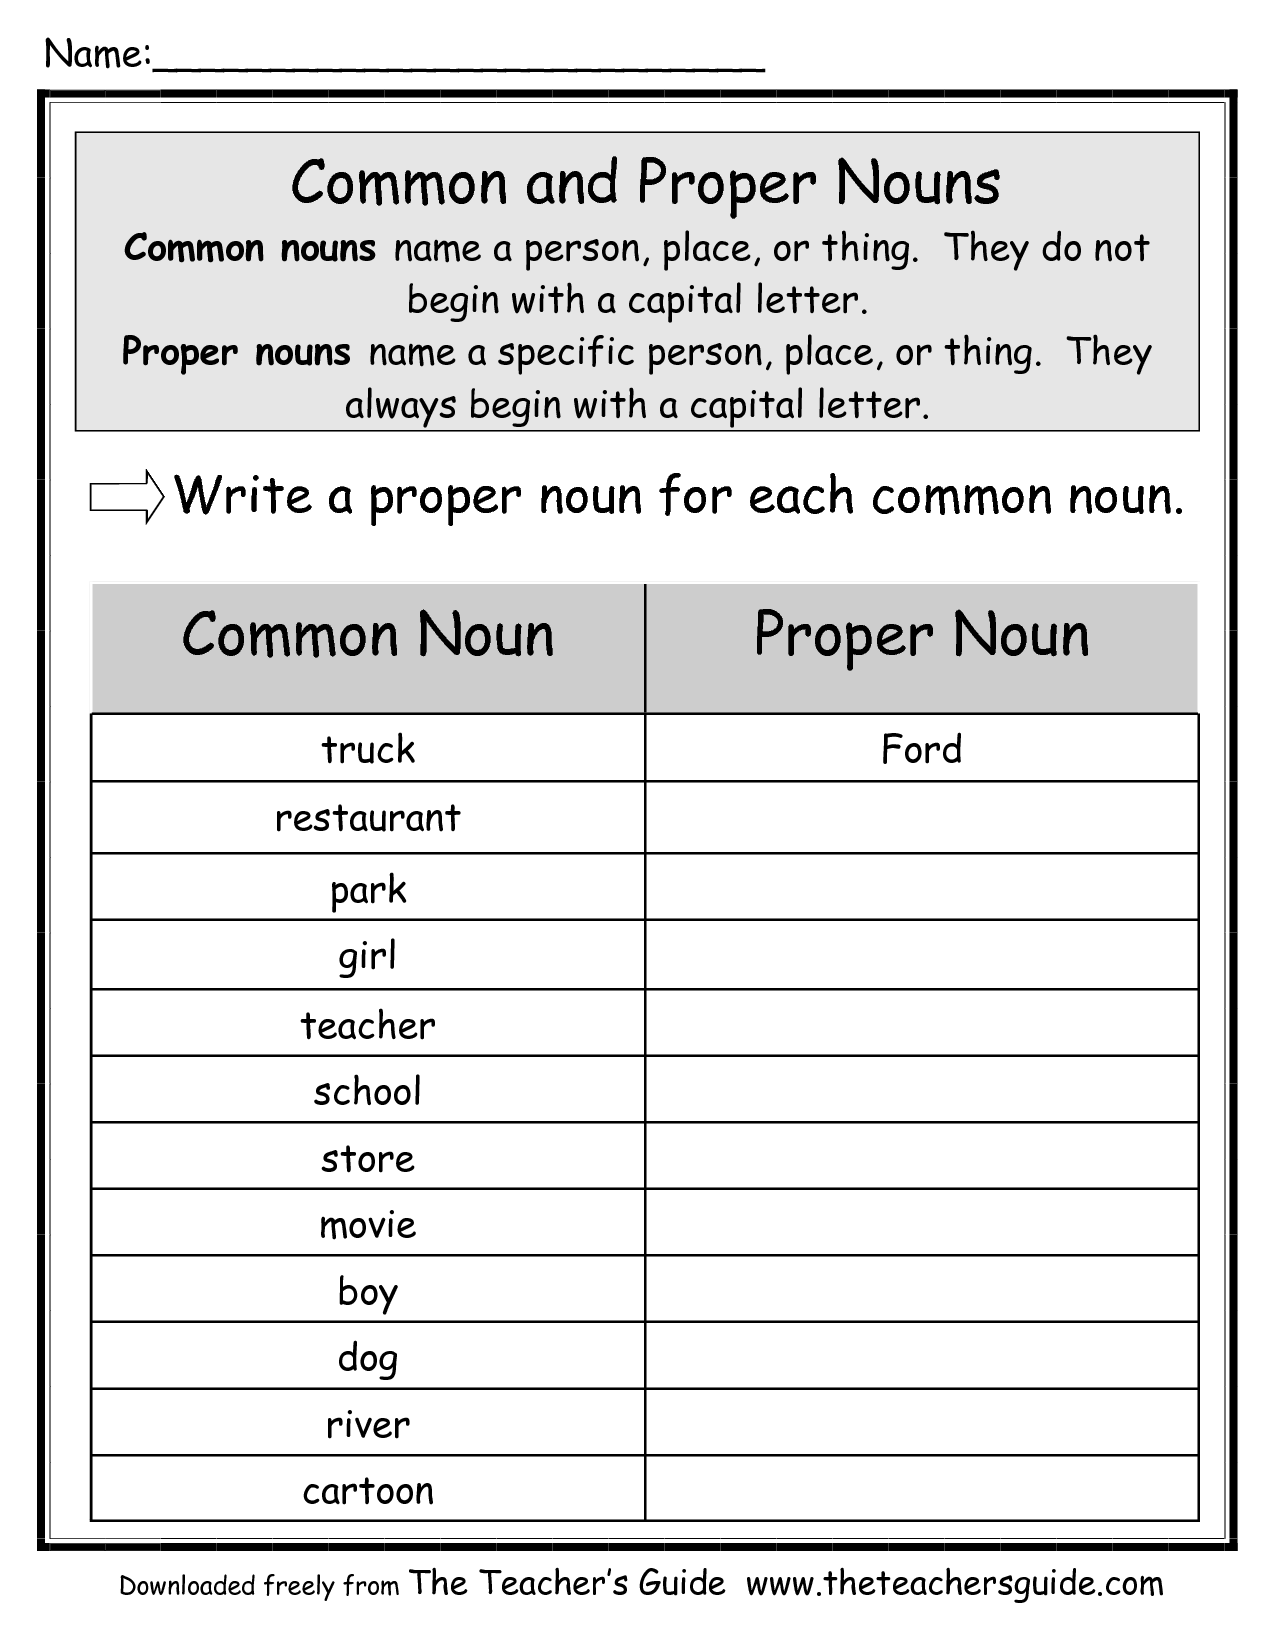 Common And Proper Nouns Worksheet 6th Grade